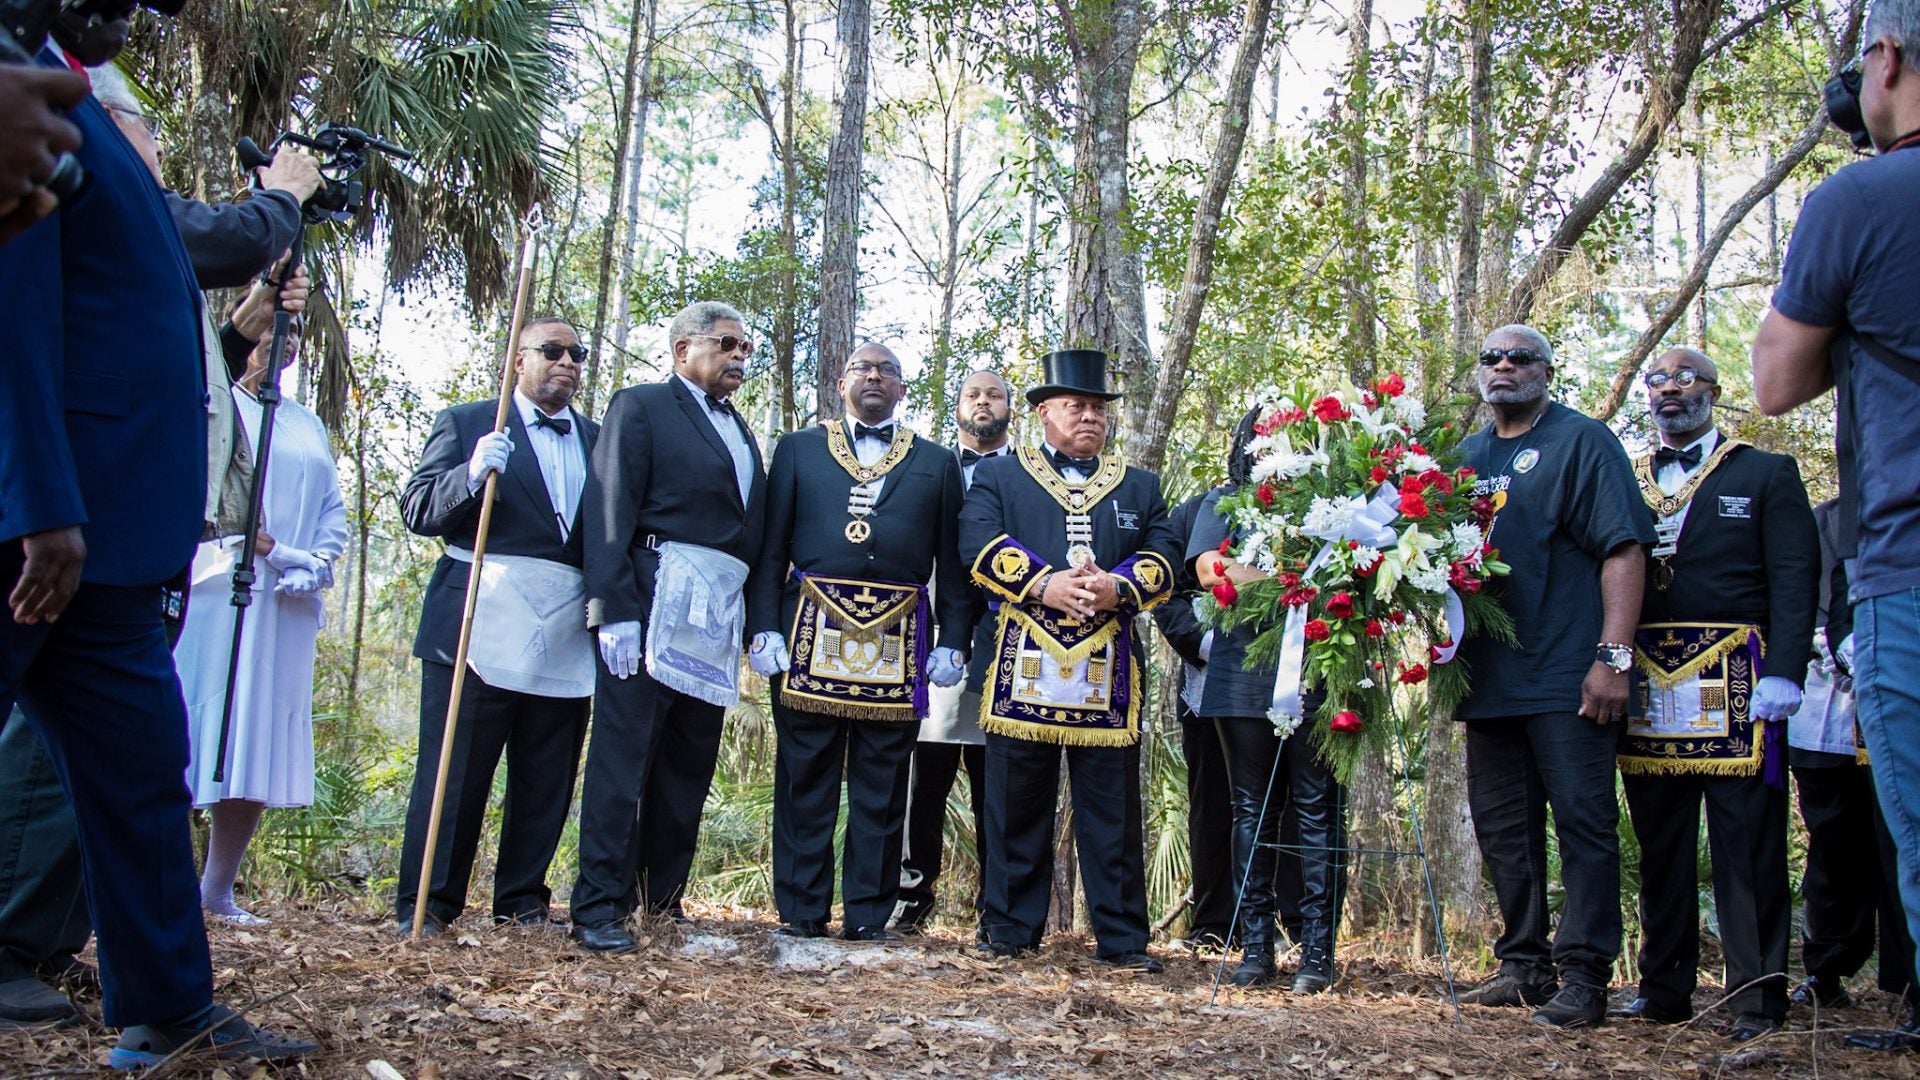 On The 100th Anniversary Of The Rosewood Massacre, We Honor Its Black Victims And Their Descendants Pushing For Reparations